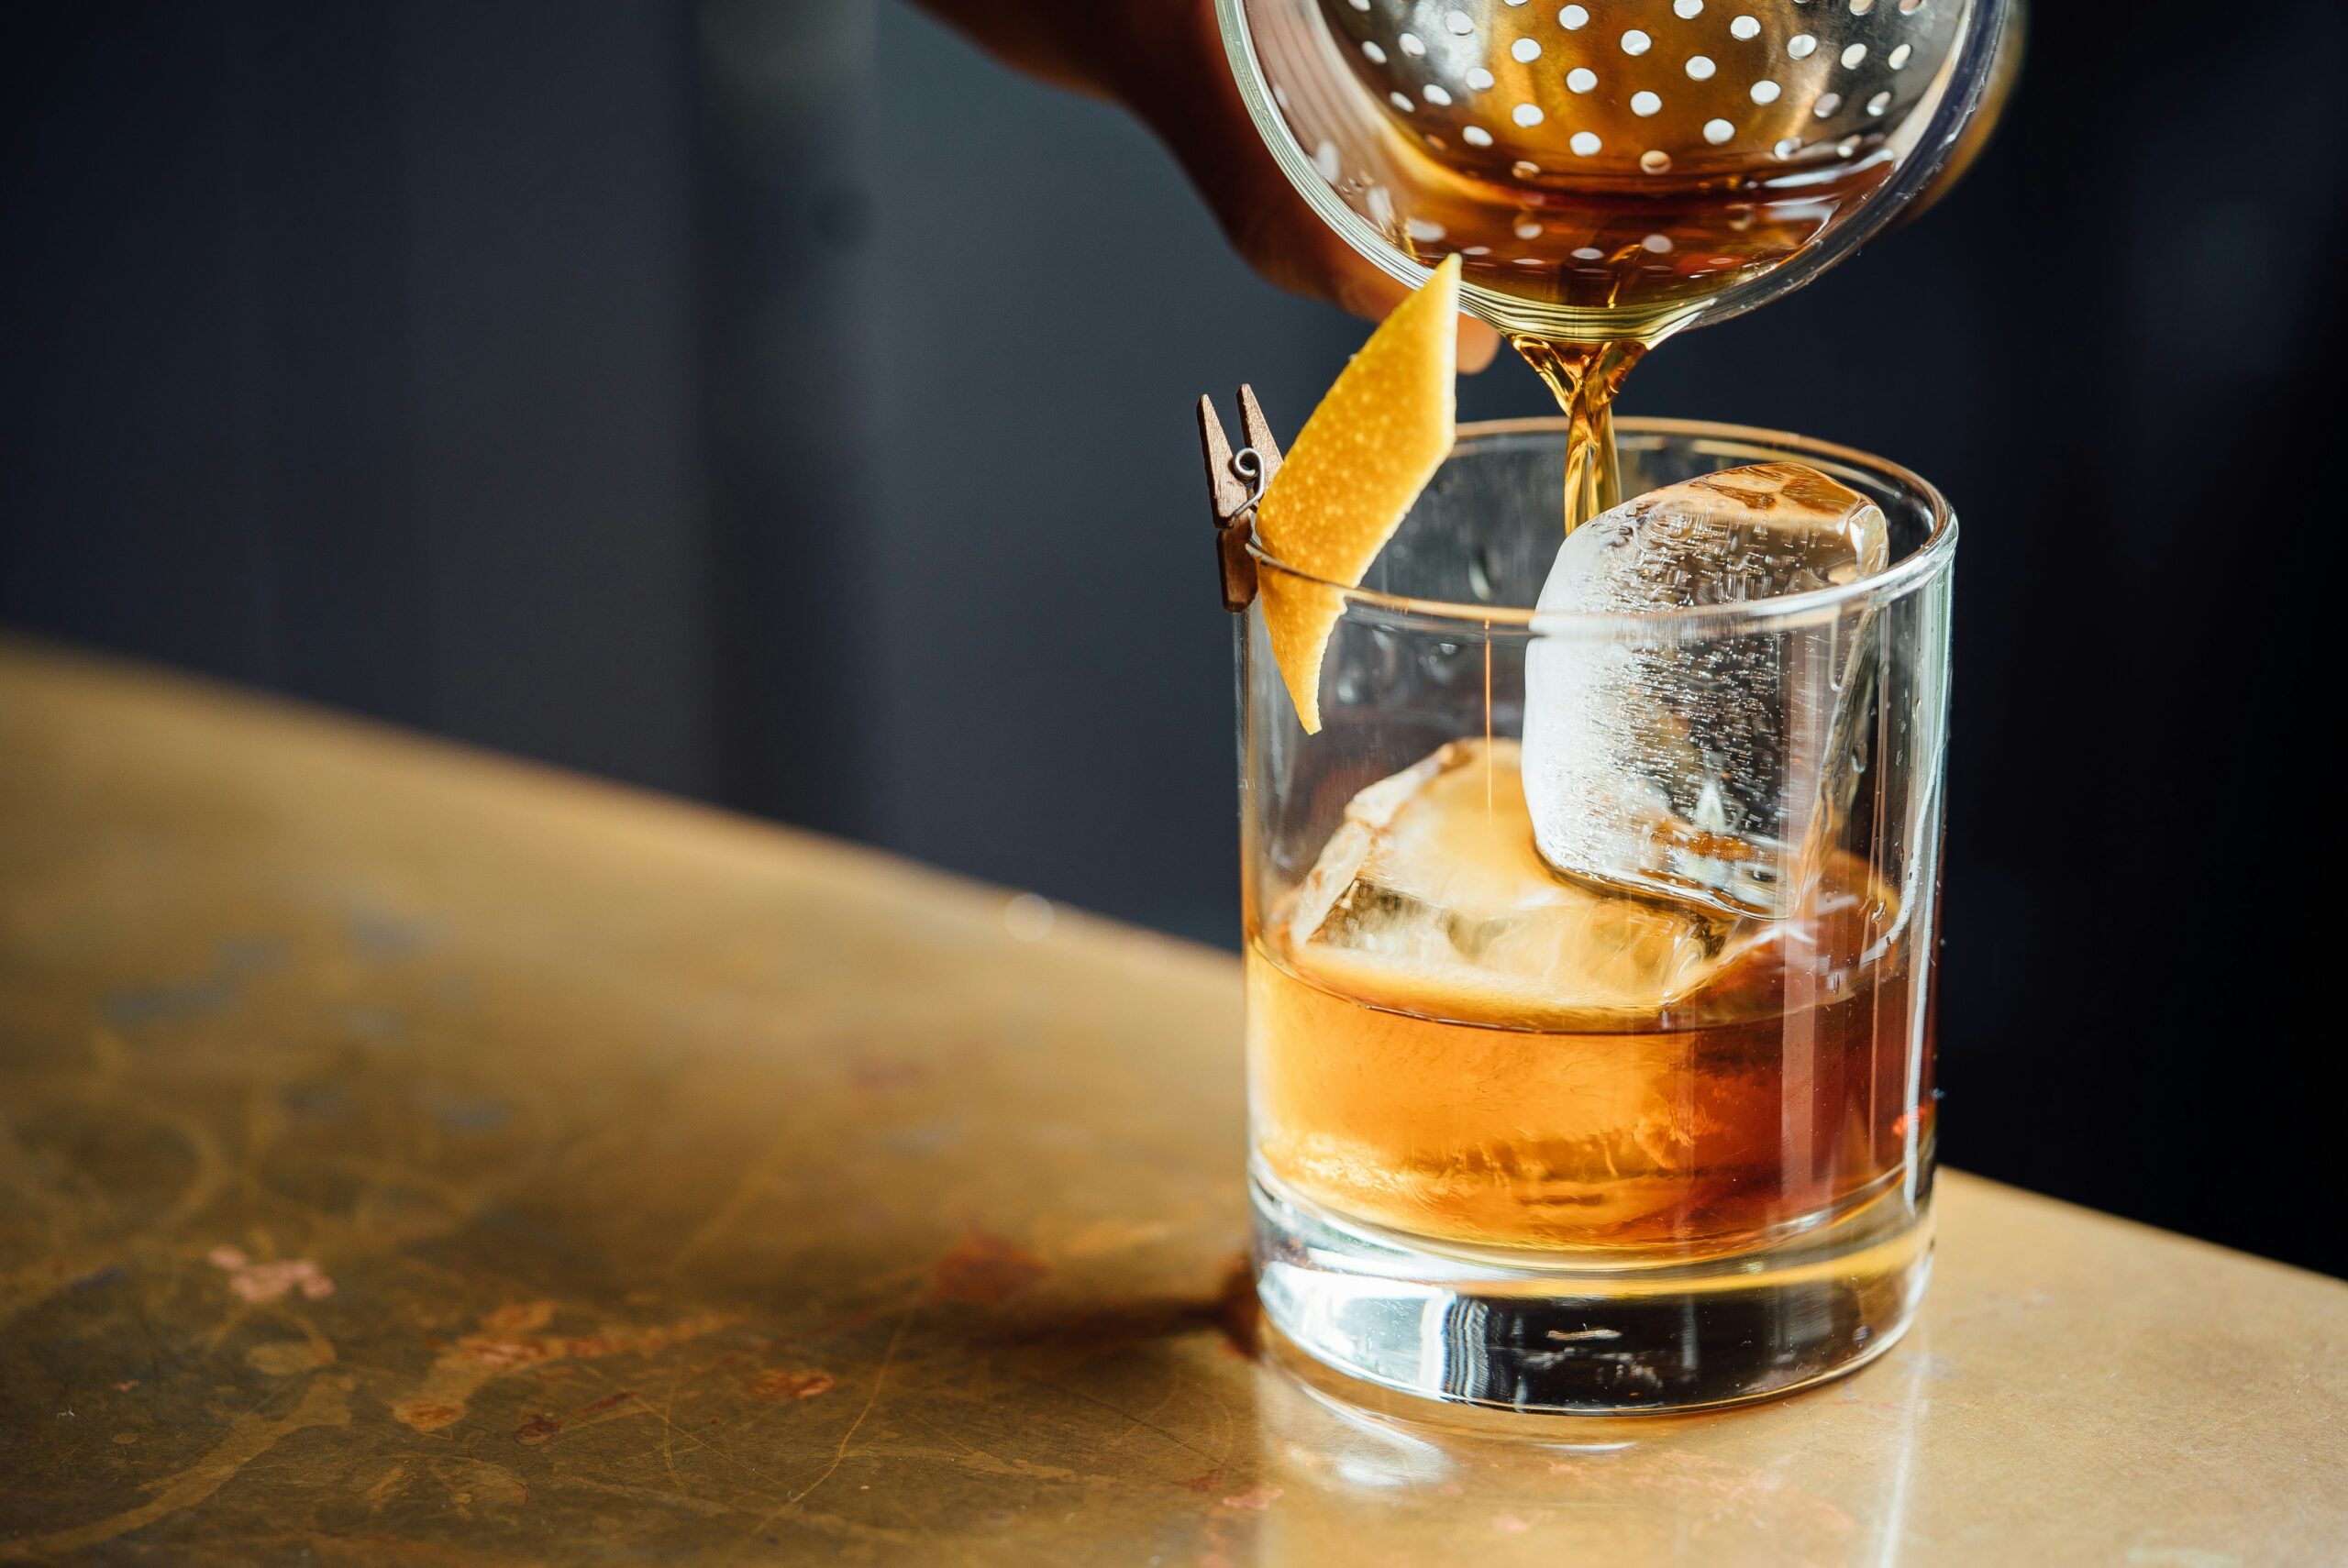 To make an old fashioned cocktail, you'll need the best whiskey. Here's what you'll need for this classic cocktail. Pictured: An old fashioned cocktail